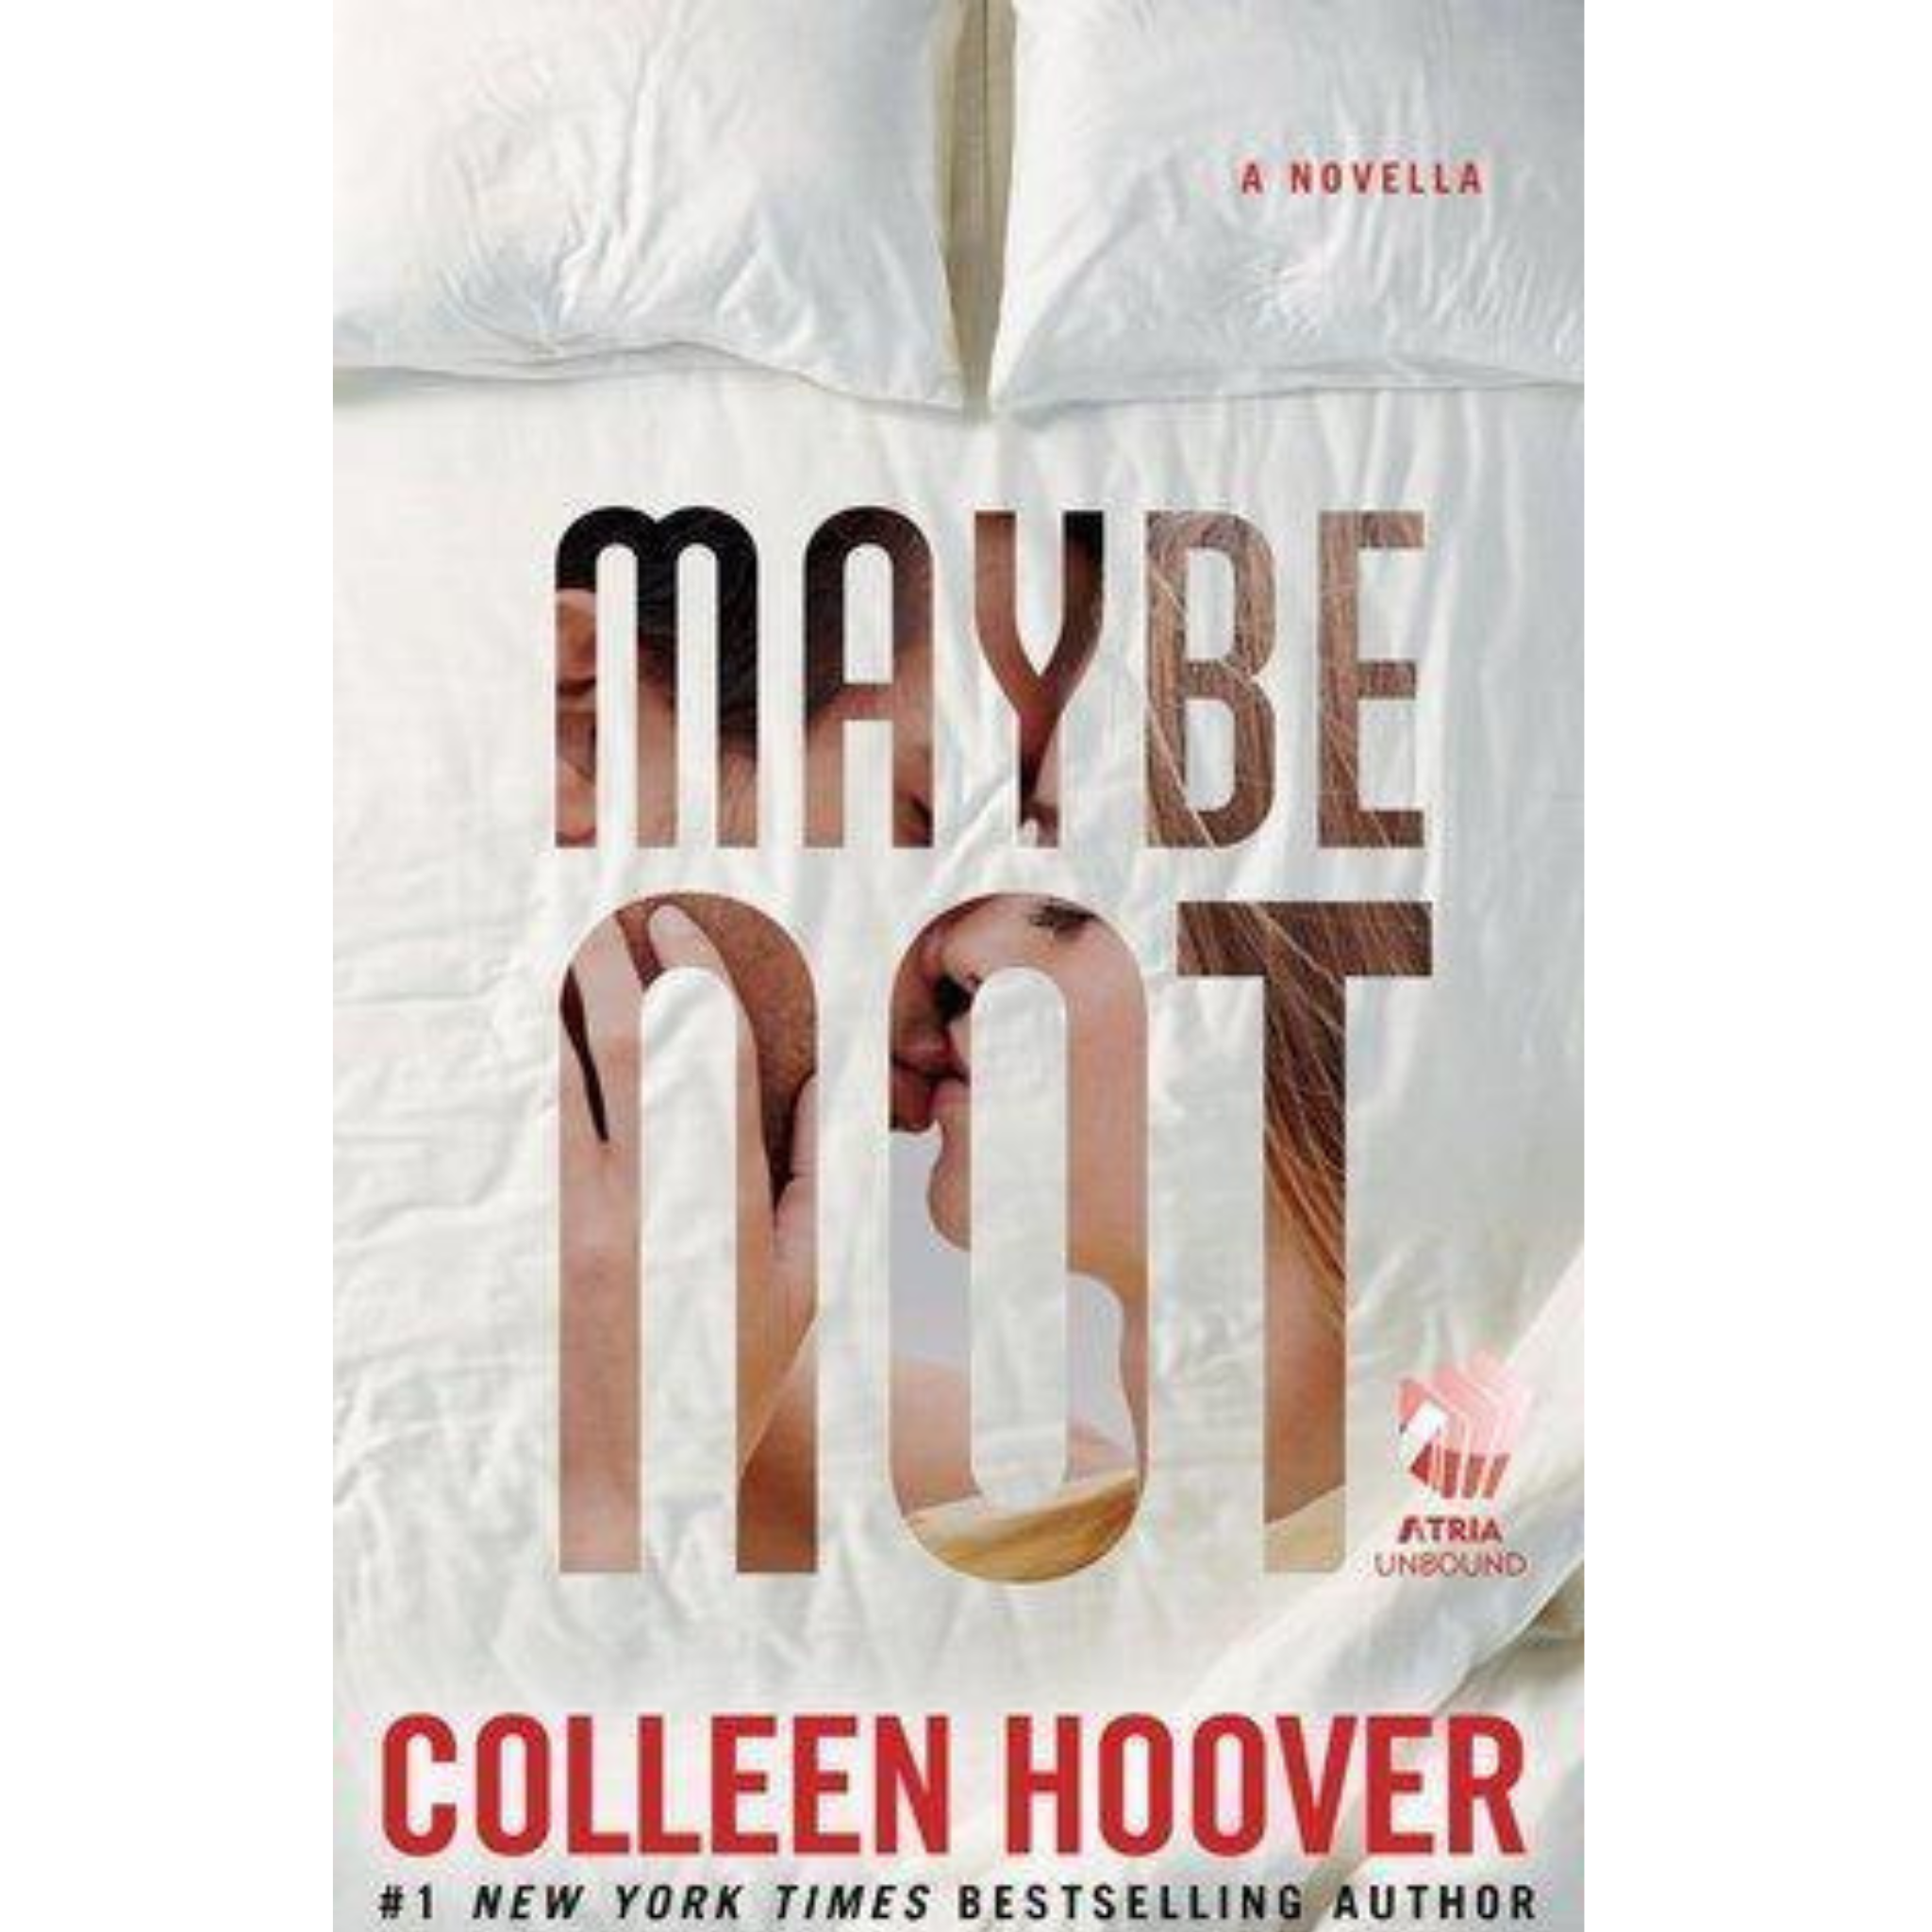 MayBe Not By Colleen Hoover